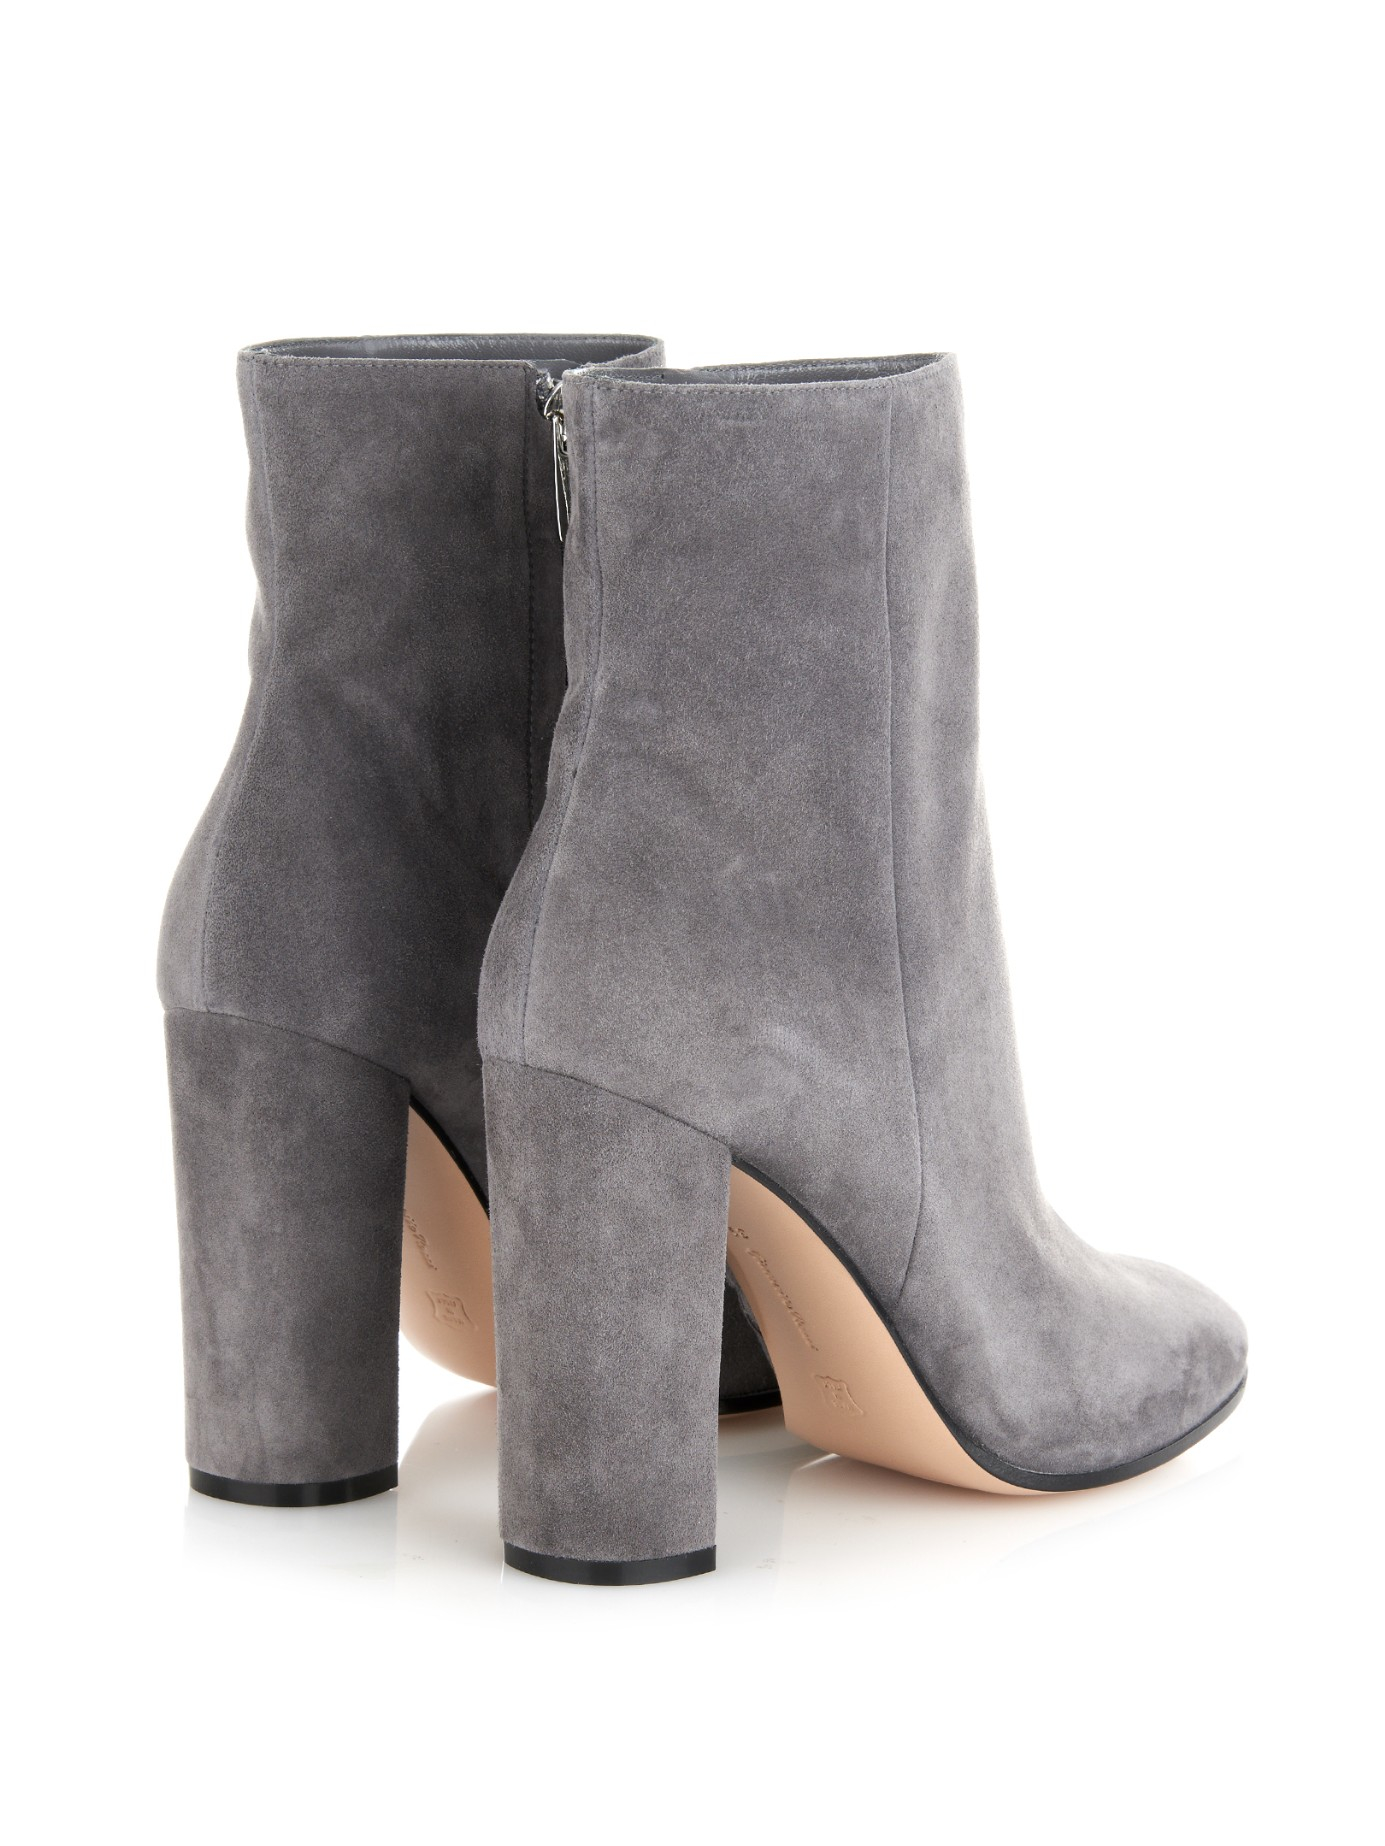 Gianvito rossi Rolling Suede Ankle Boots in Gray | Lyst